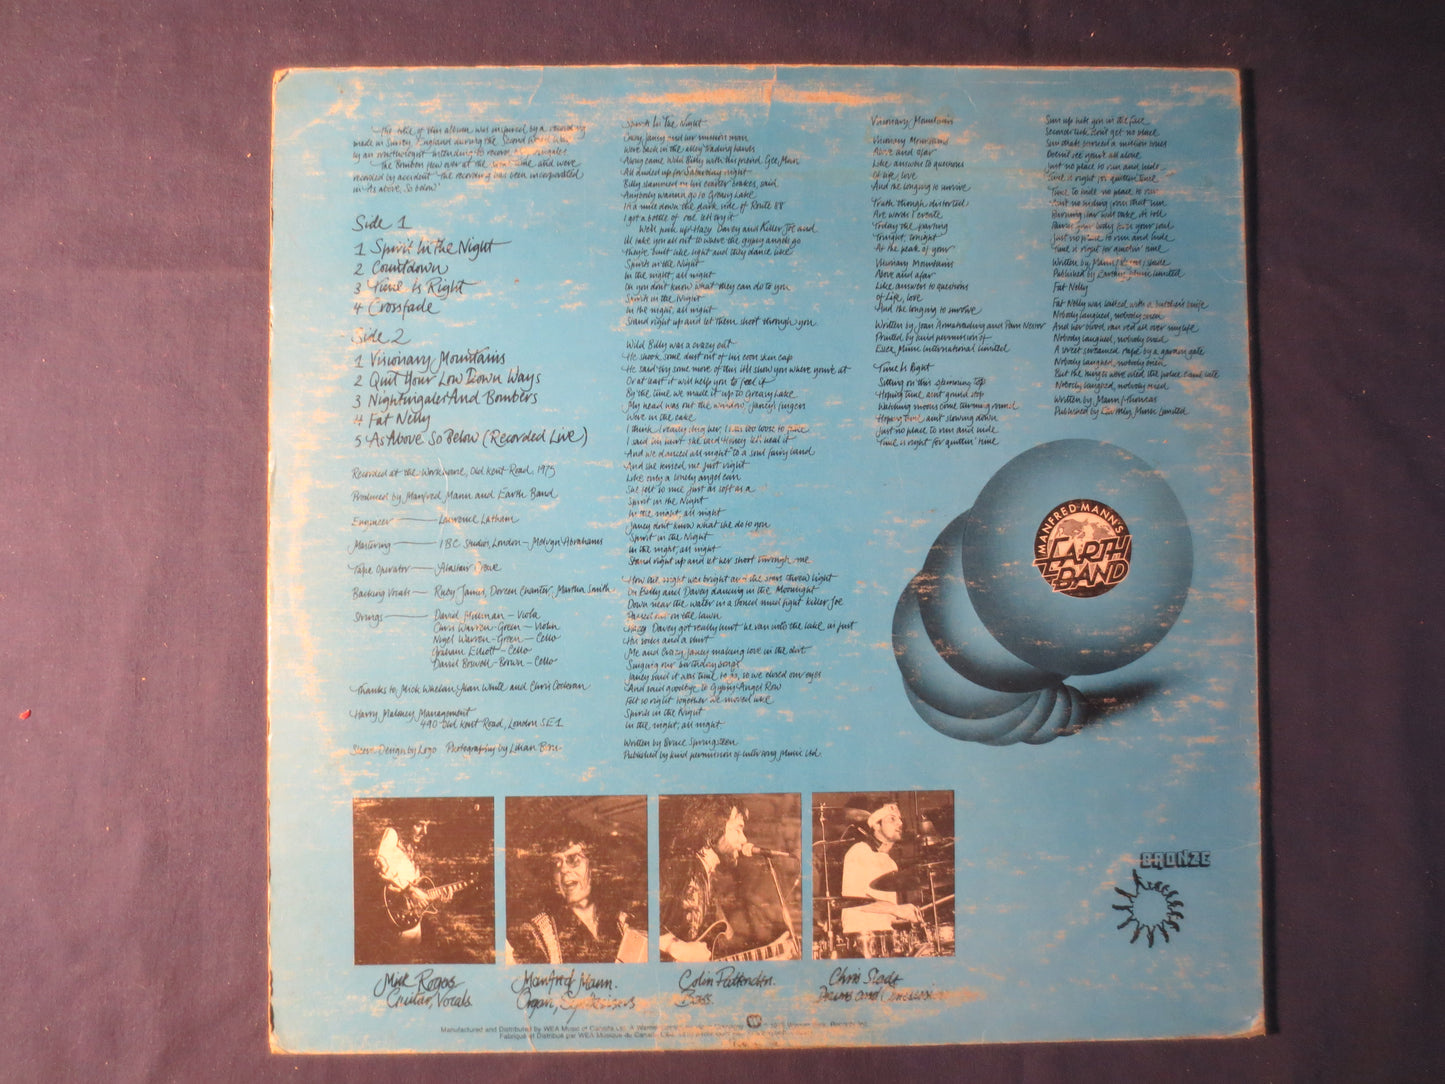 MANFRED MANN's EARTH Band, Nightingales and Bombers, Vintage Vinyl, Record Vinyl, Records, Vinyl Records, 1975 Records